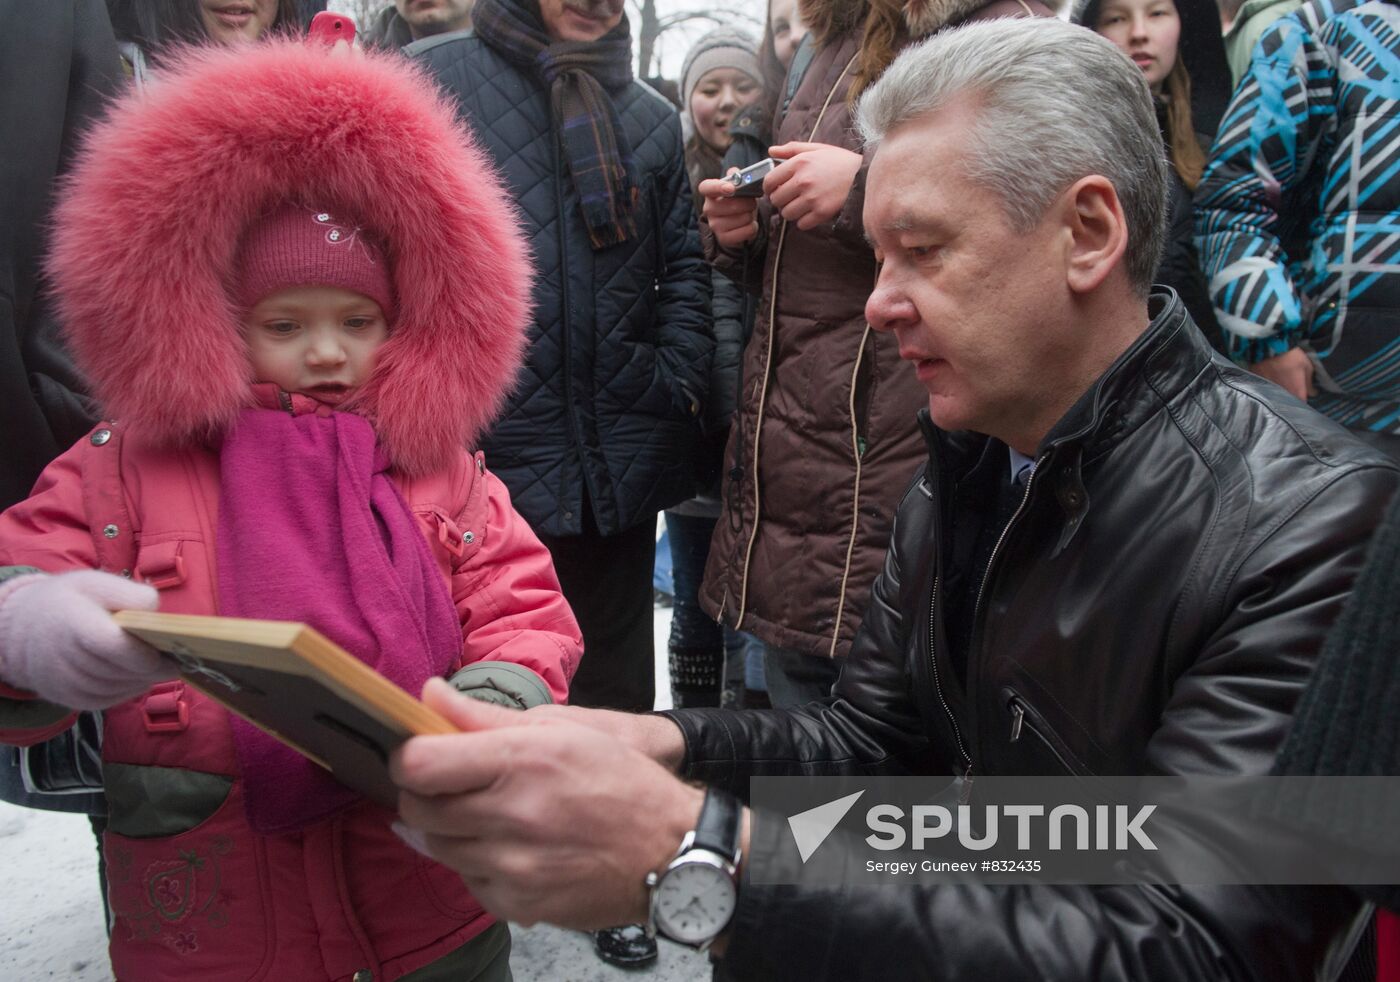 Moscow Mayor Sergei Sobyanin visits Snow and Ice Festival